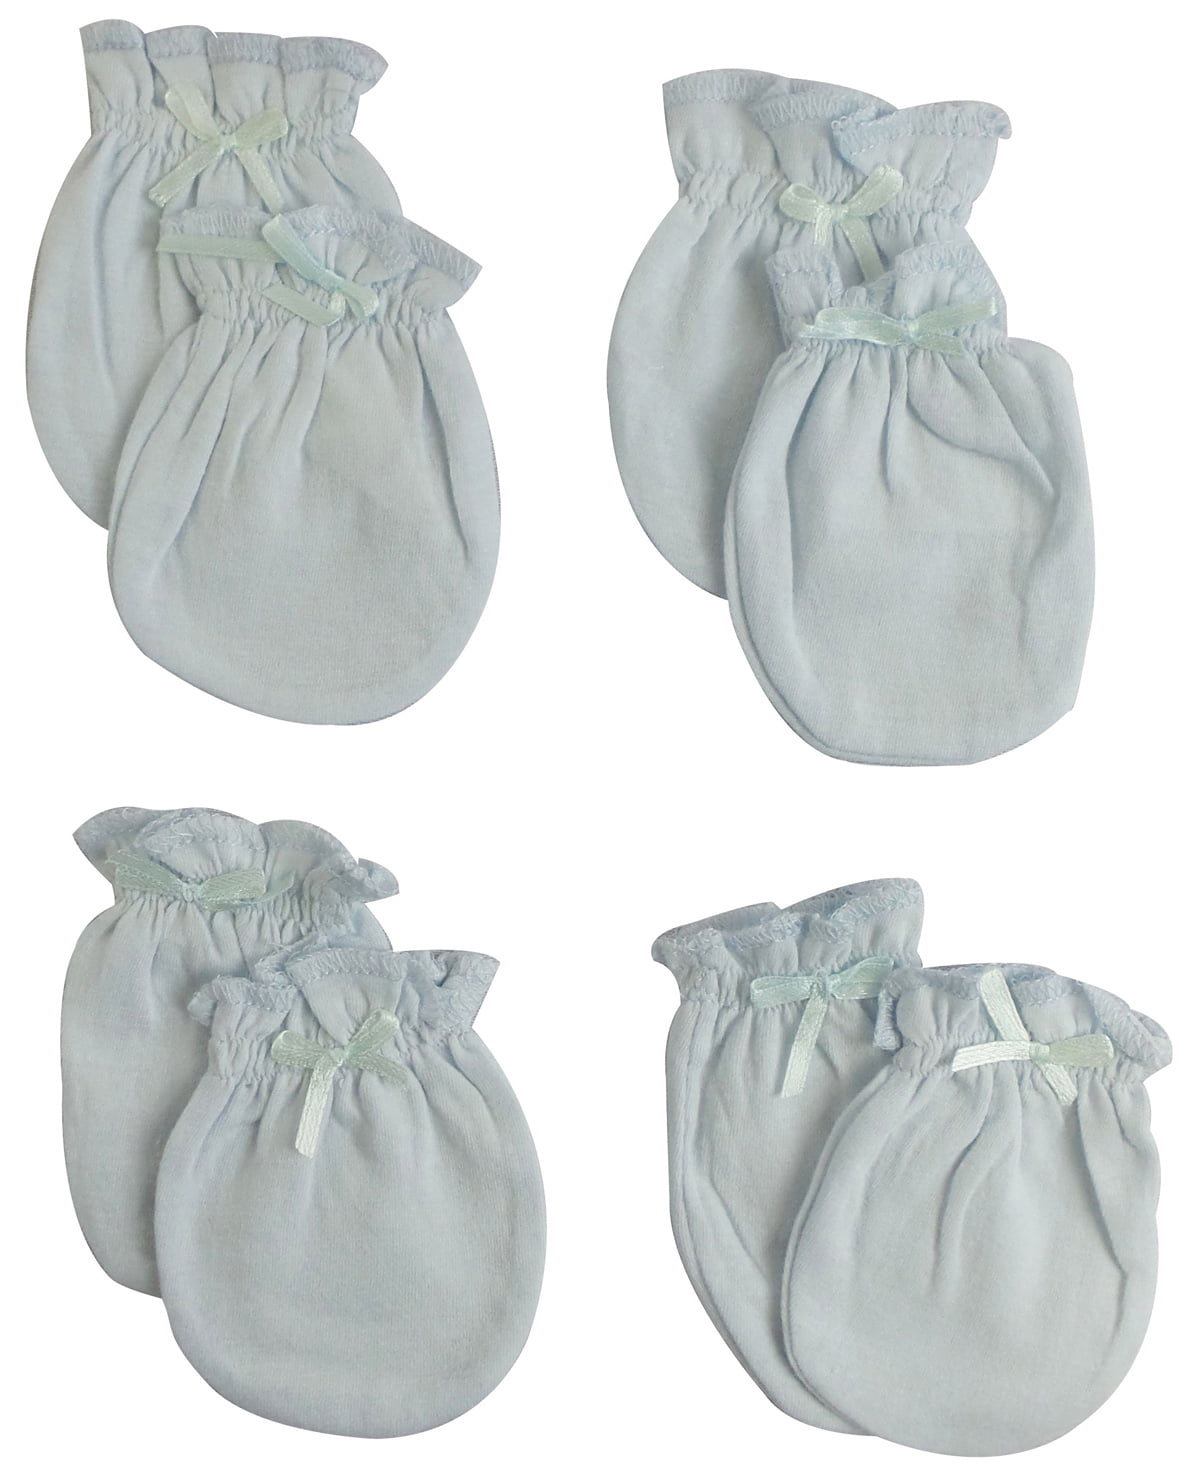 116-blue-4-pack Infant Mittens, Blue - Pack Of 4